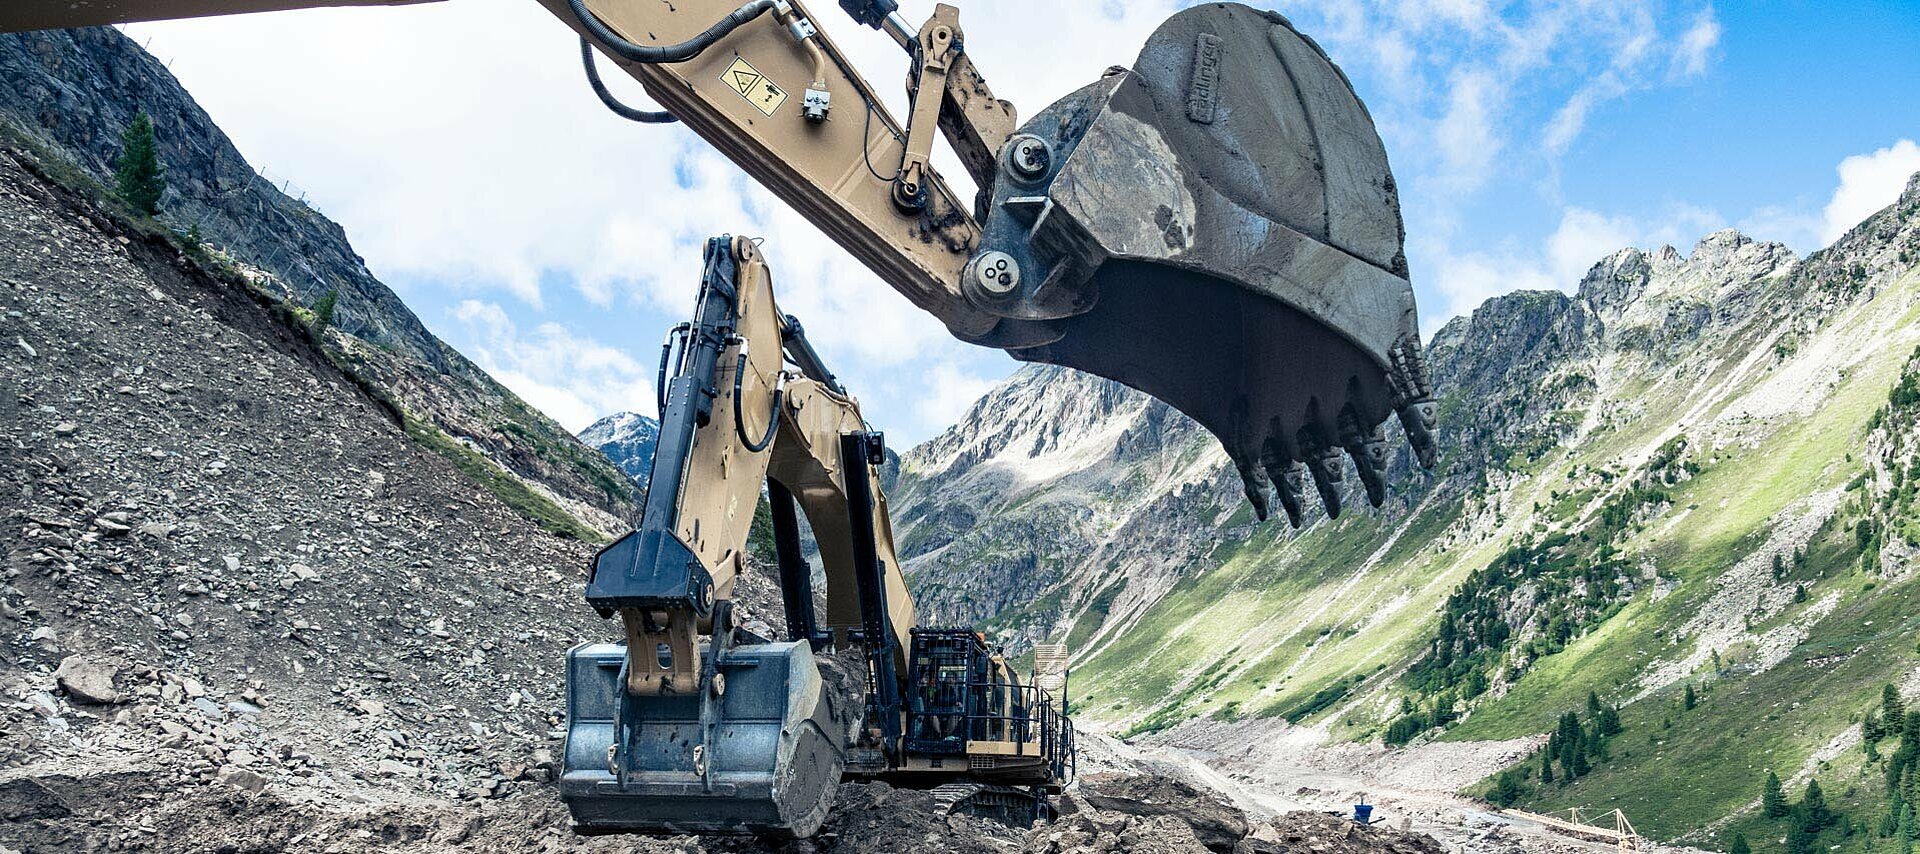 Attachments for excavators by Rädlinger in one of many fields of application